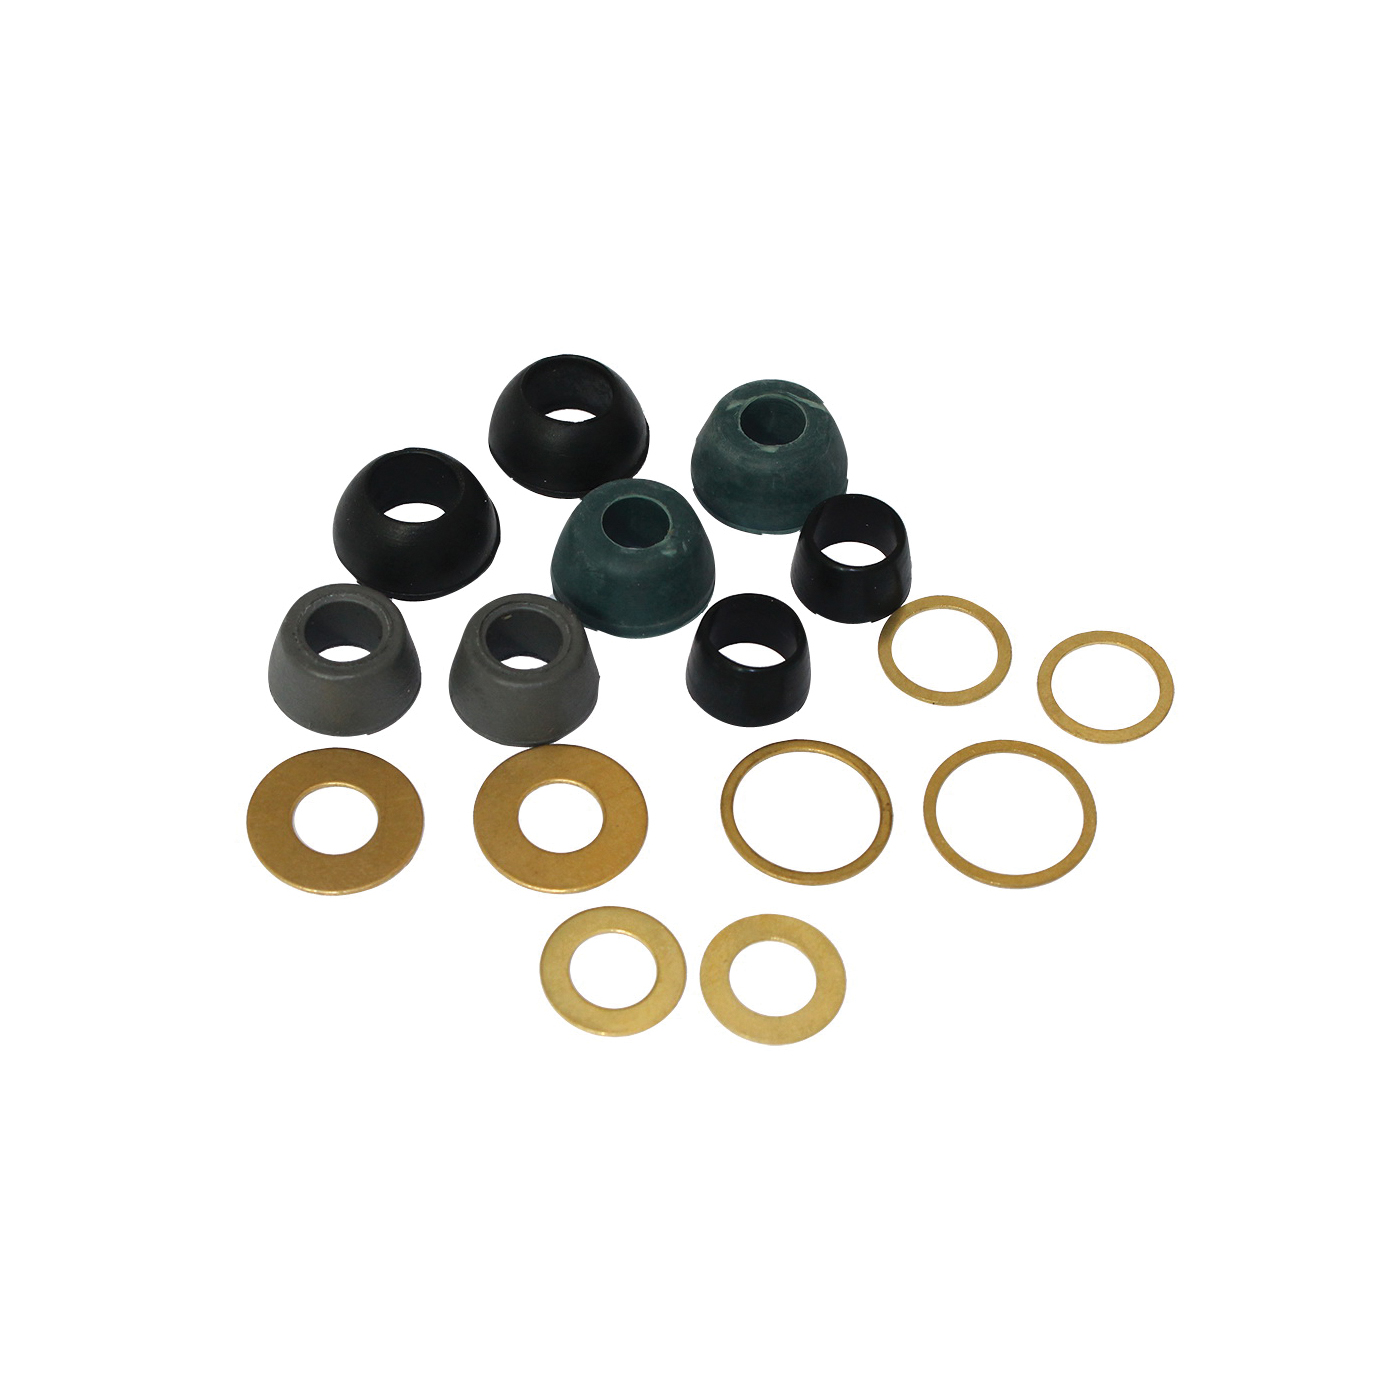 PP810-30 Cone Washer Assortment, For: Faucet and Toilets